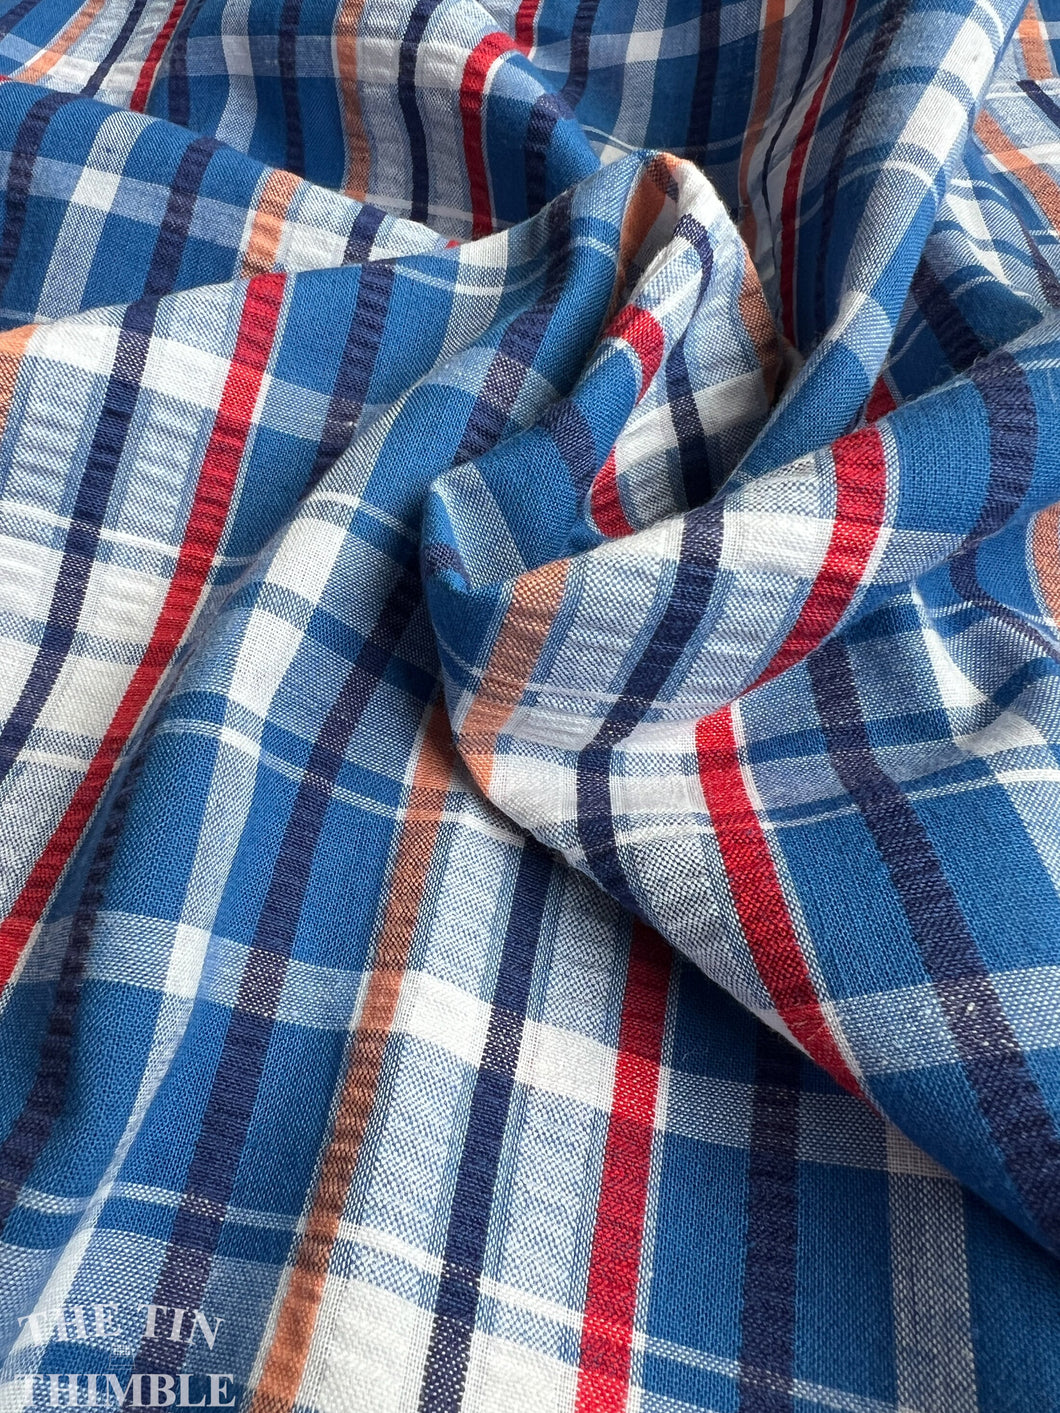 Vintage 1970s Cotton/Poly Plaid Plisse - By the Yard - Large Plaid Plisse in Blue, Red, White and Orange